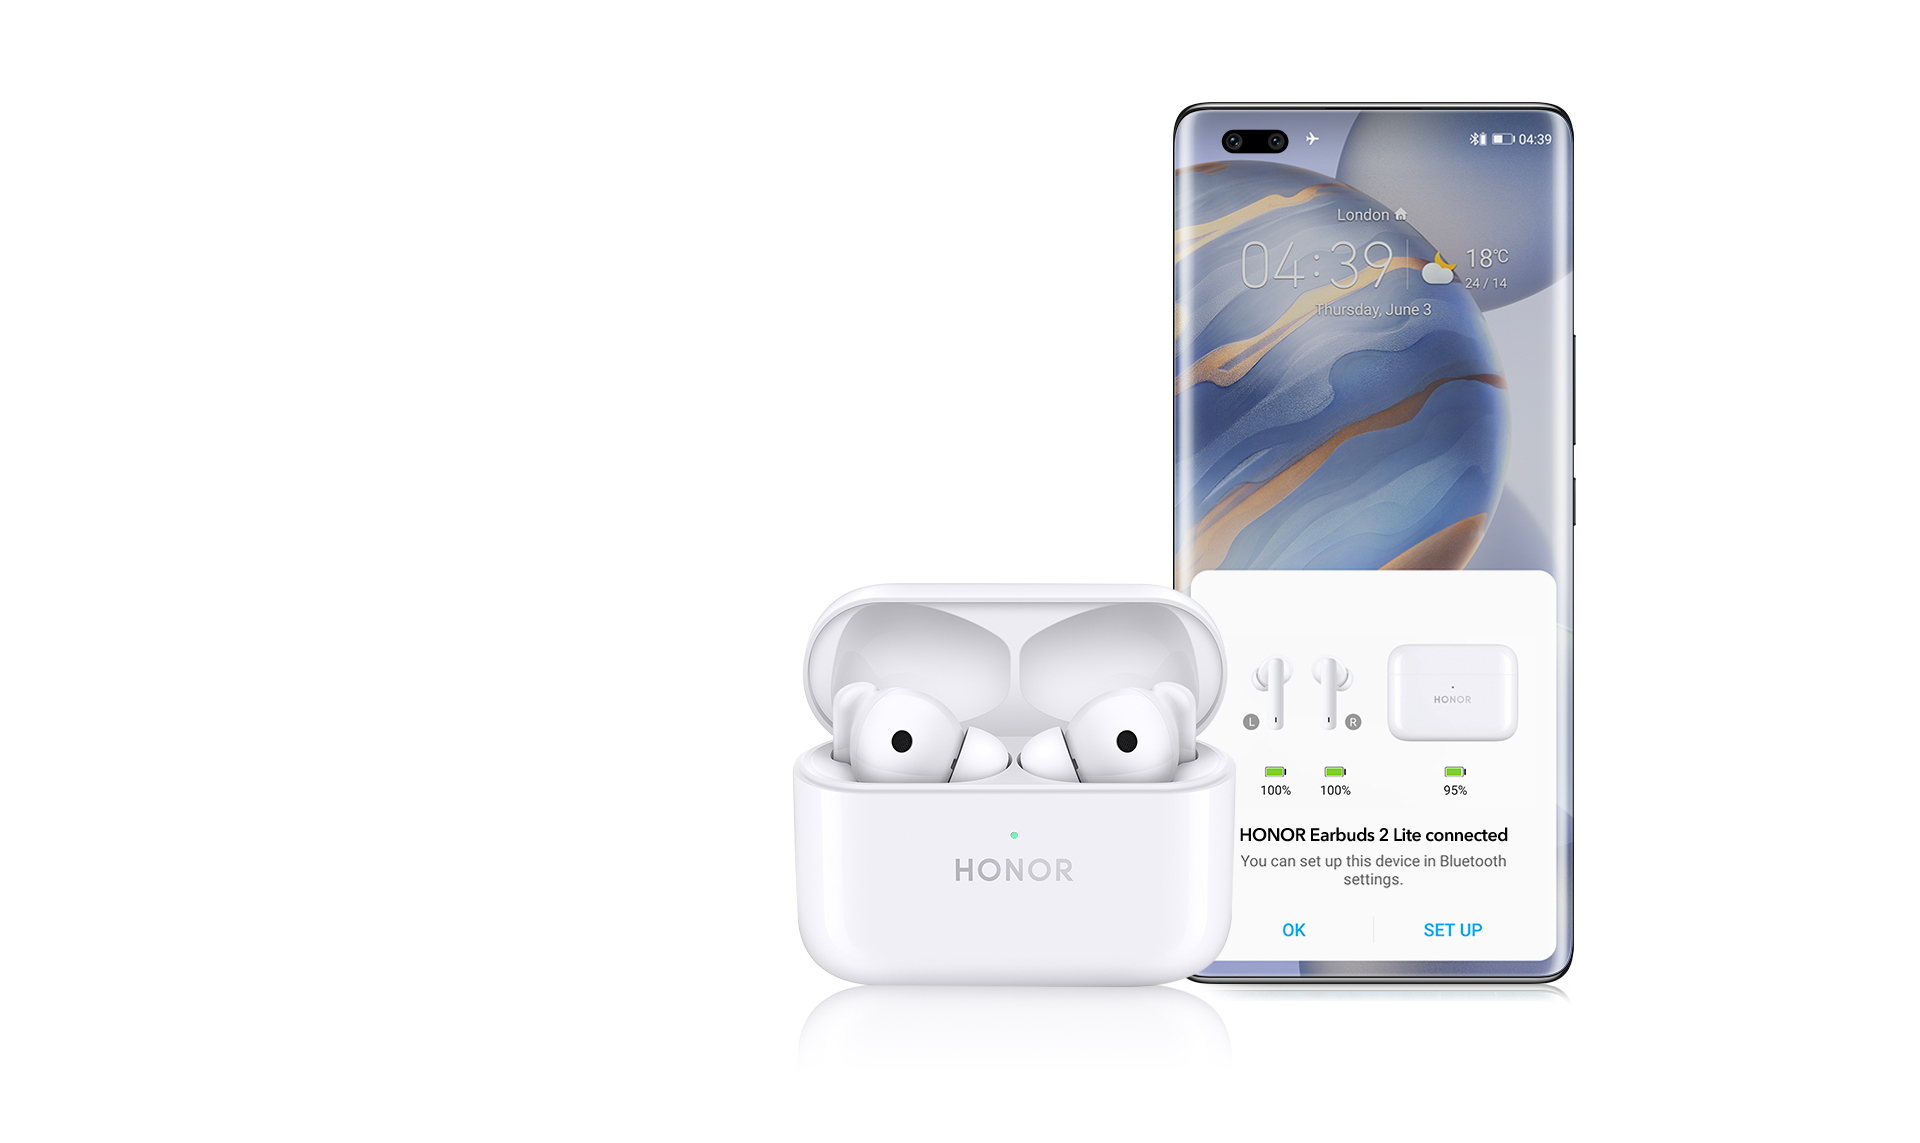 Open the case and connect: After being opened, selected smartphones can automatically find the earbuds and pair with them